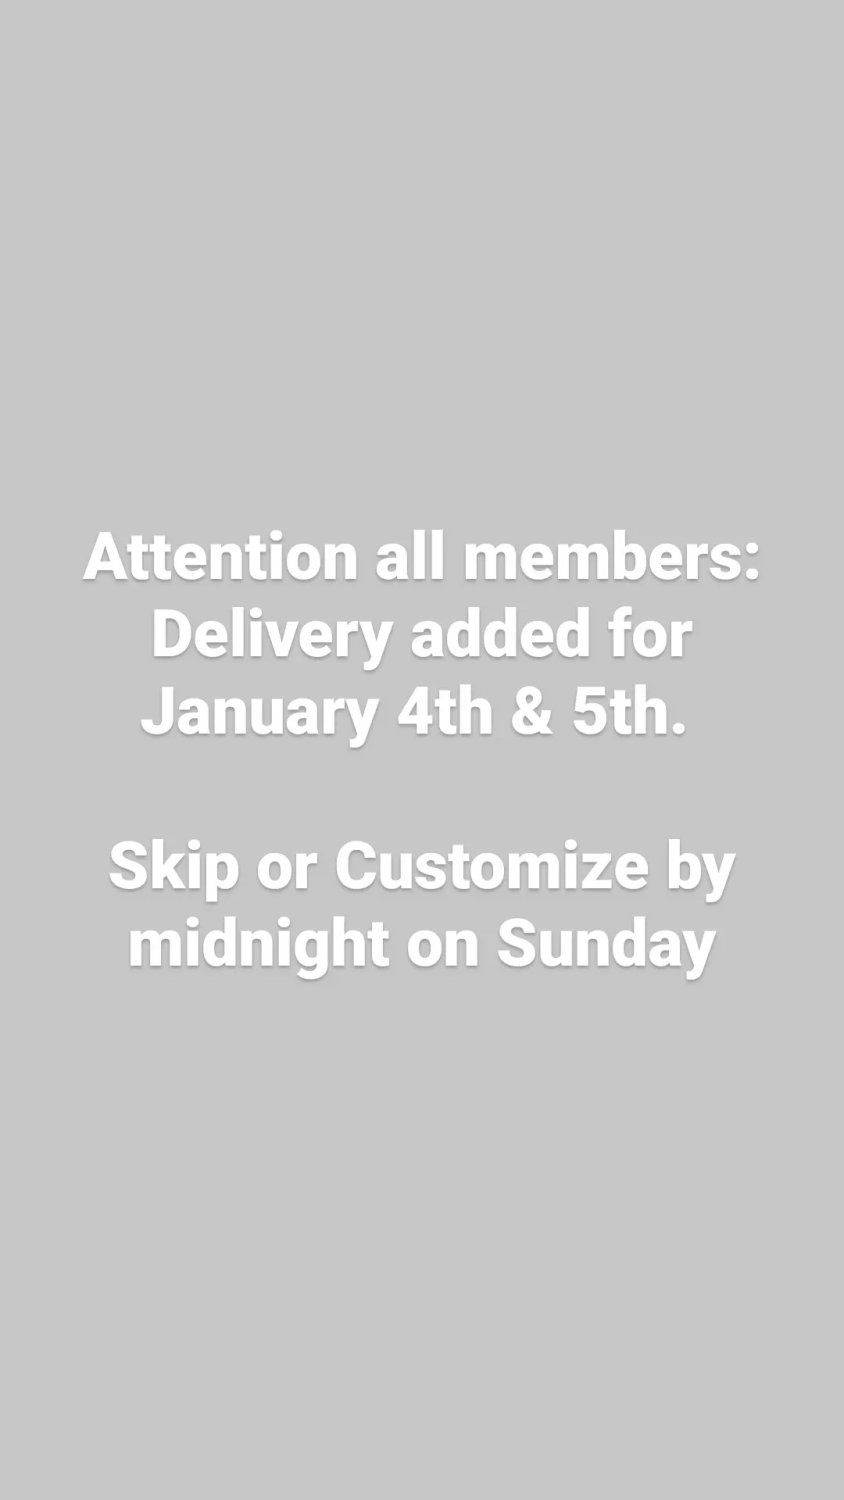 Previous Happening: IMPORTANT: Delivery added for January 4th and 5th. Please customize your order.